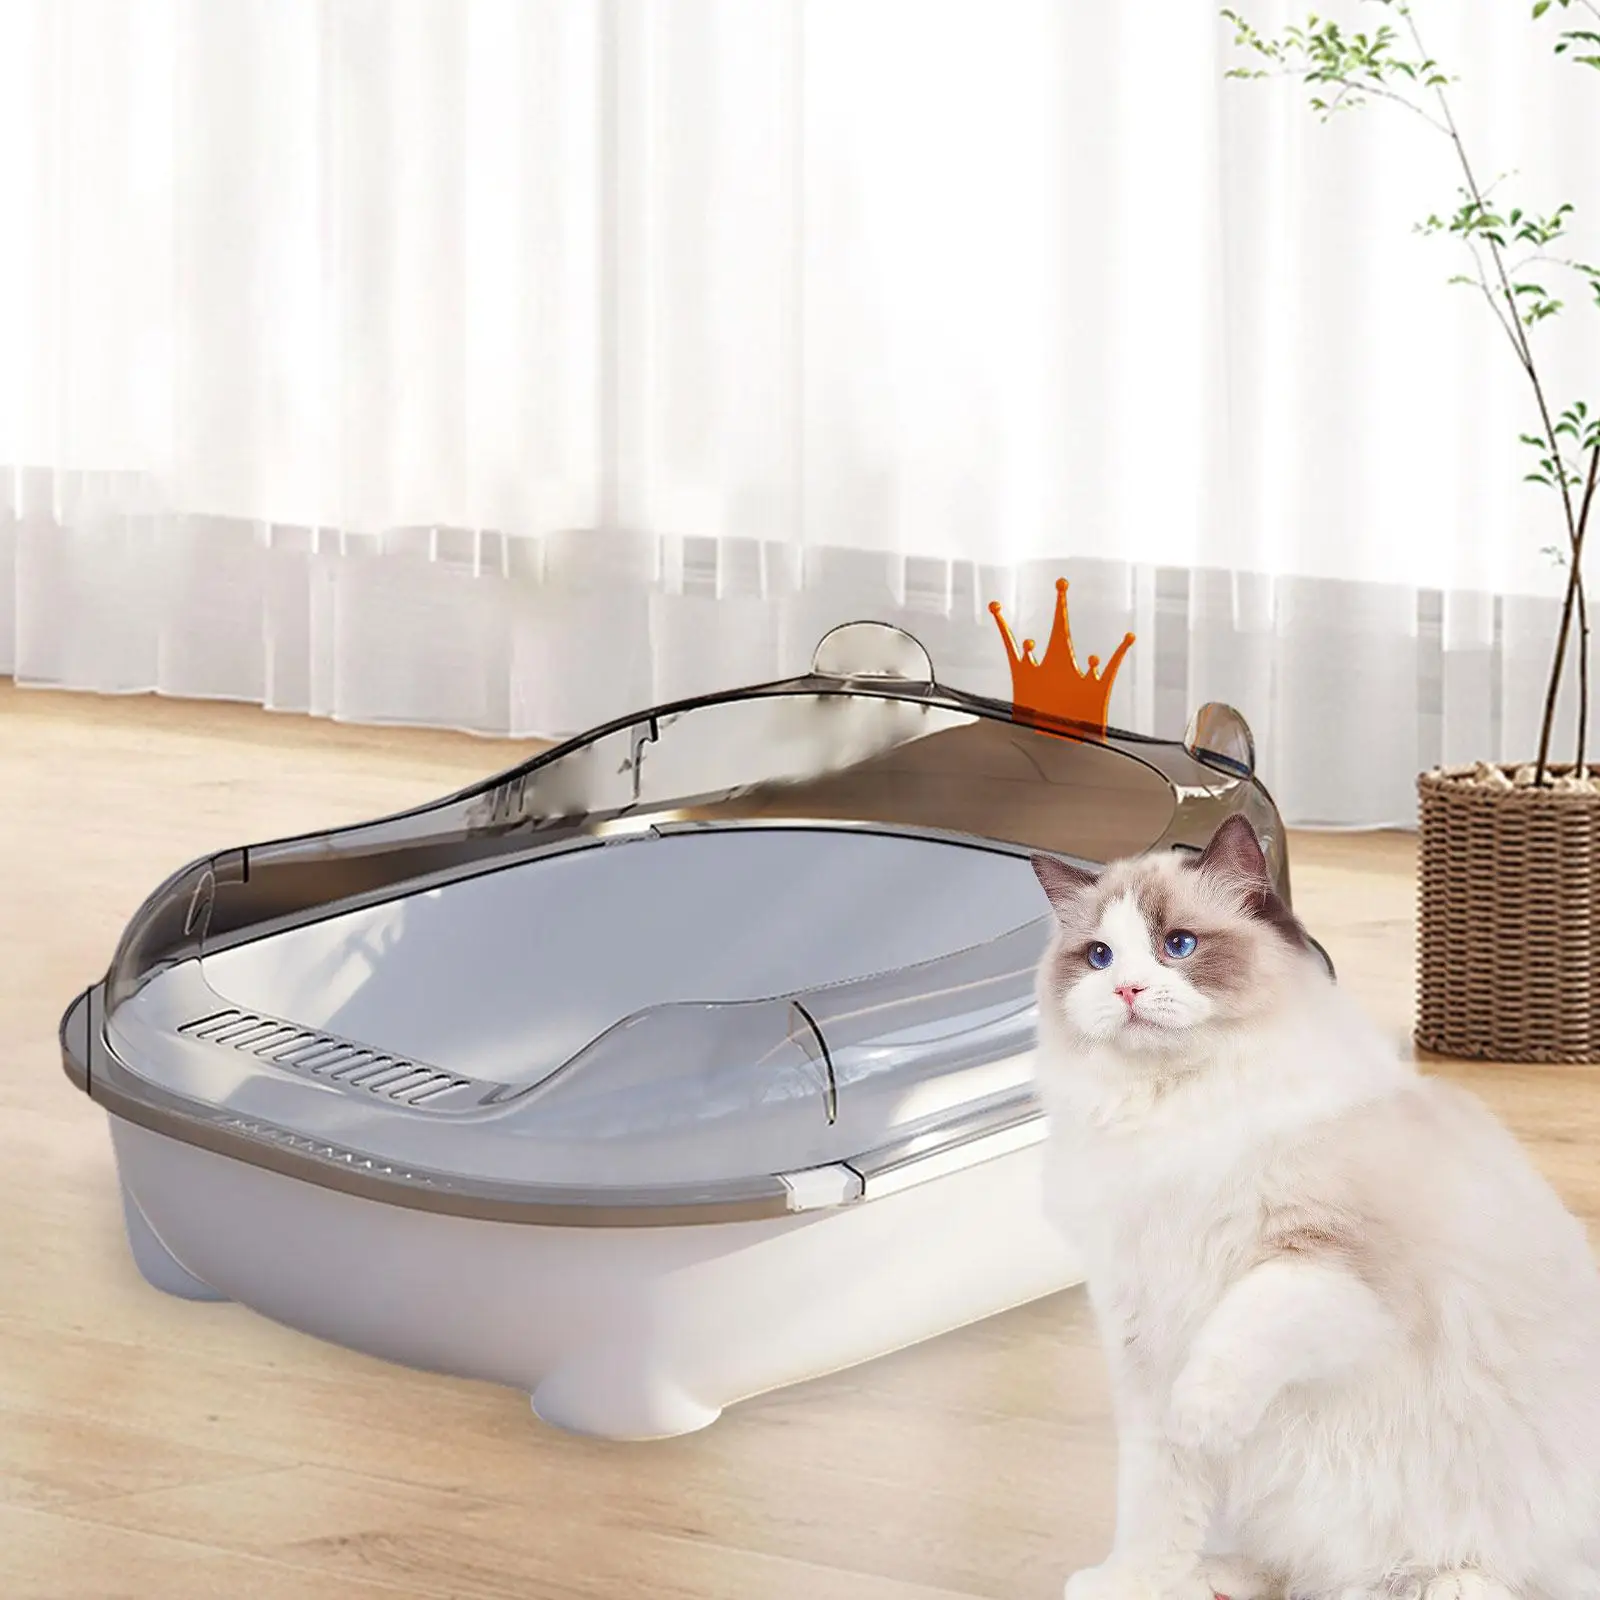 Cat Litter Box Cat Litter Basin Semi Enclosed with High Side Cat Litter Tray